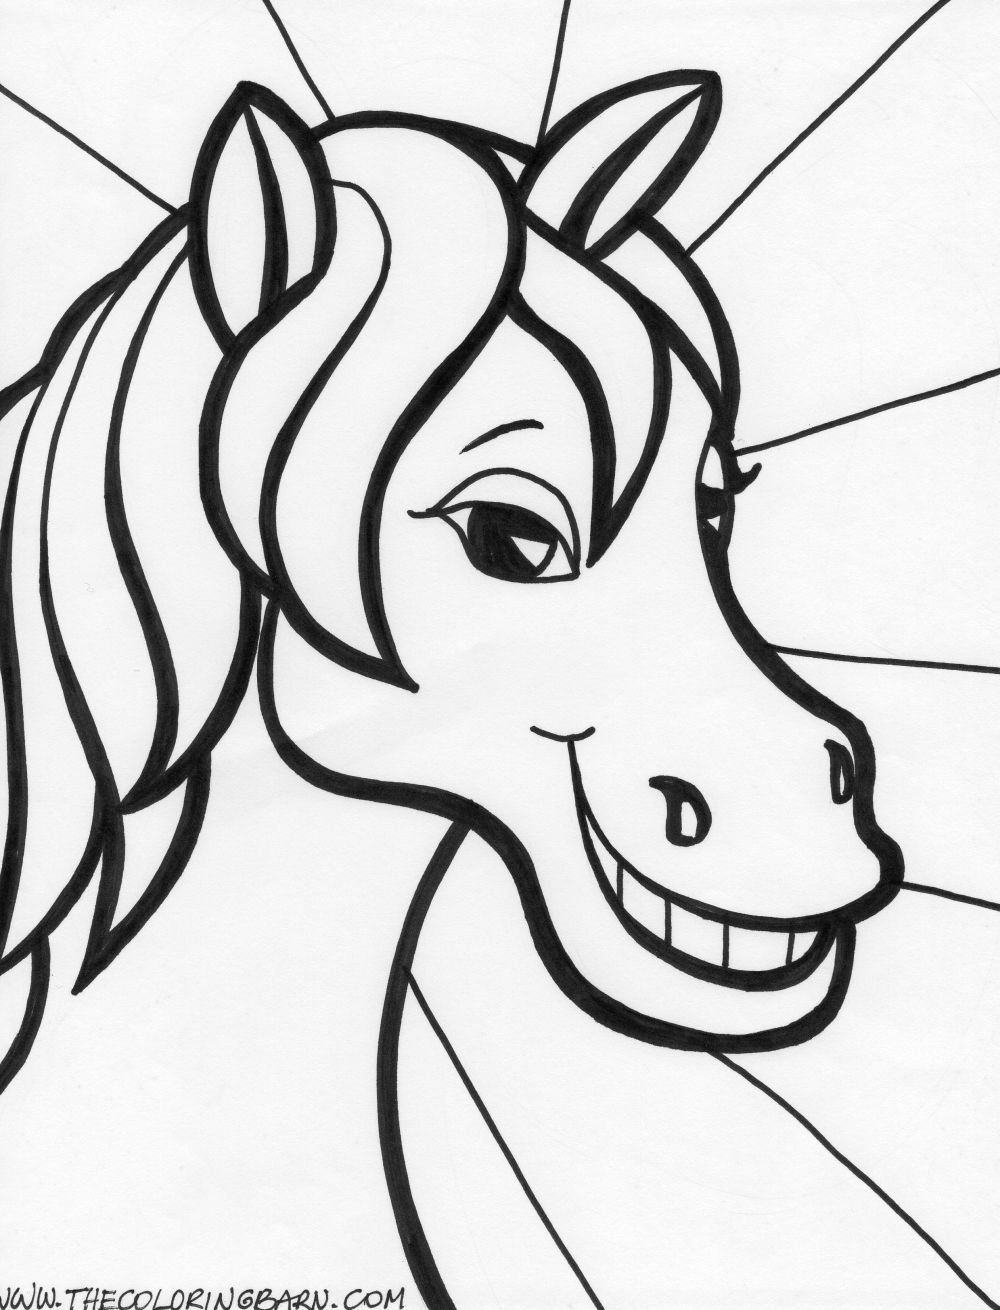  Horse coloring pages | FREE coloring pages | #18